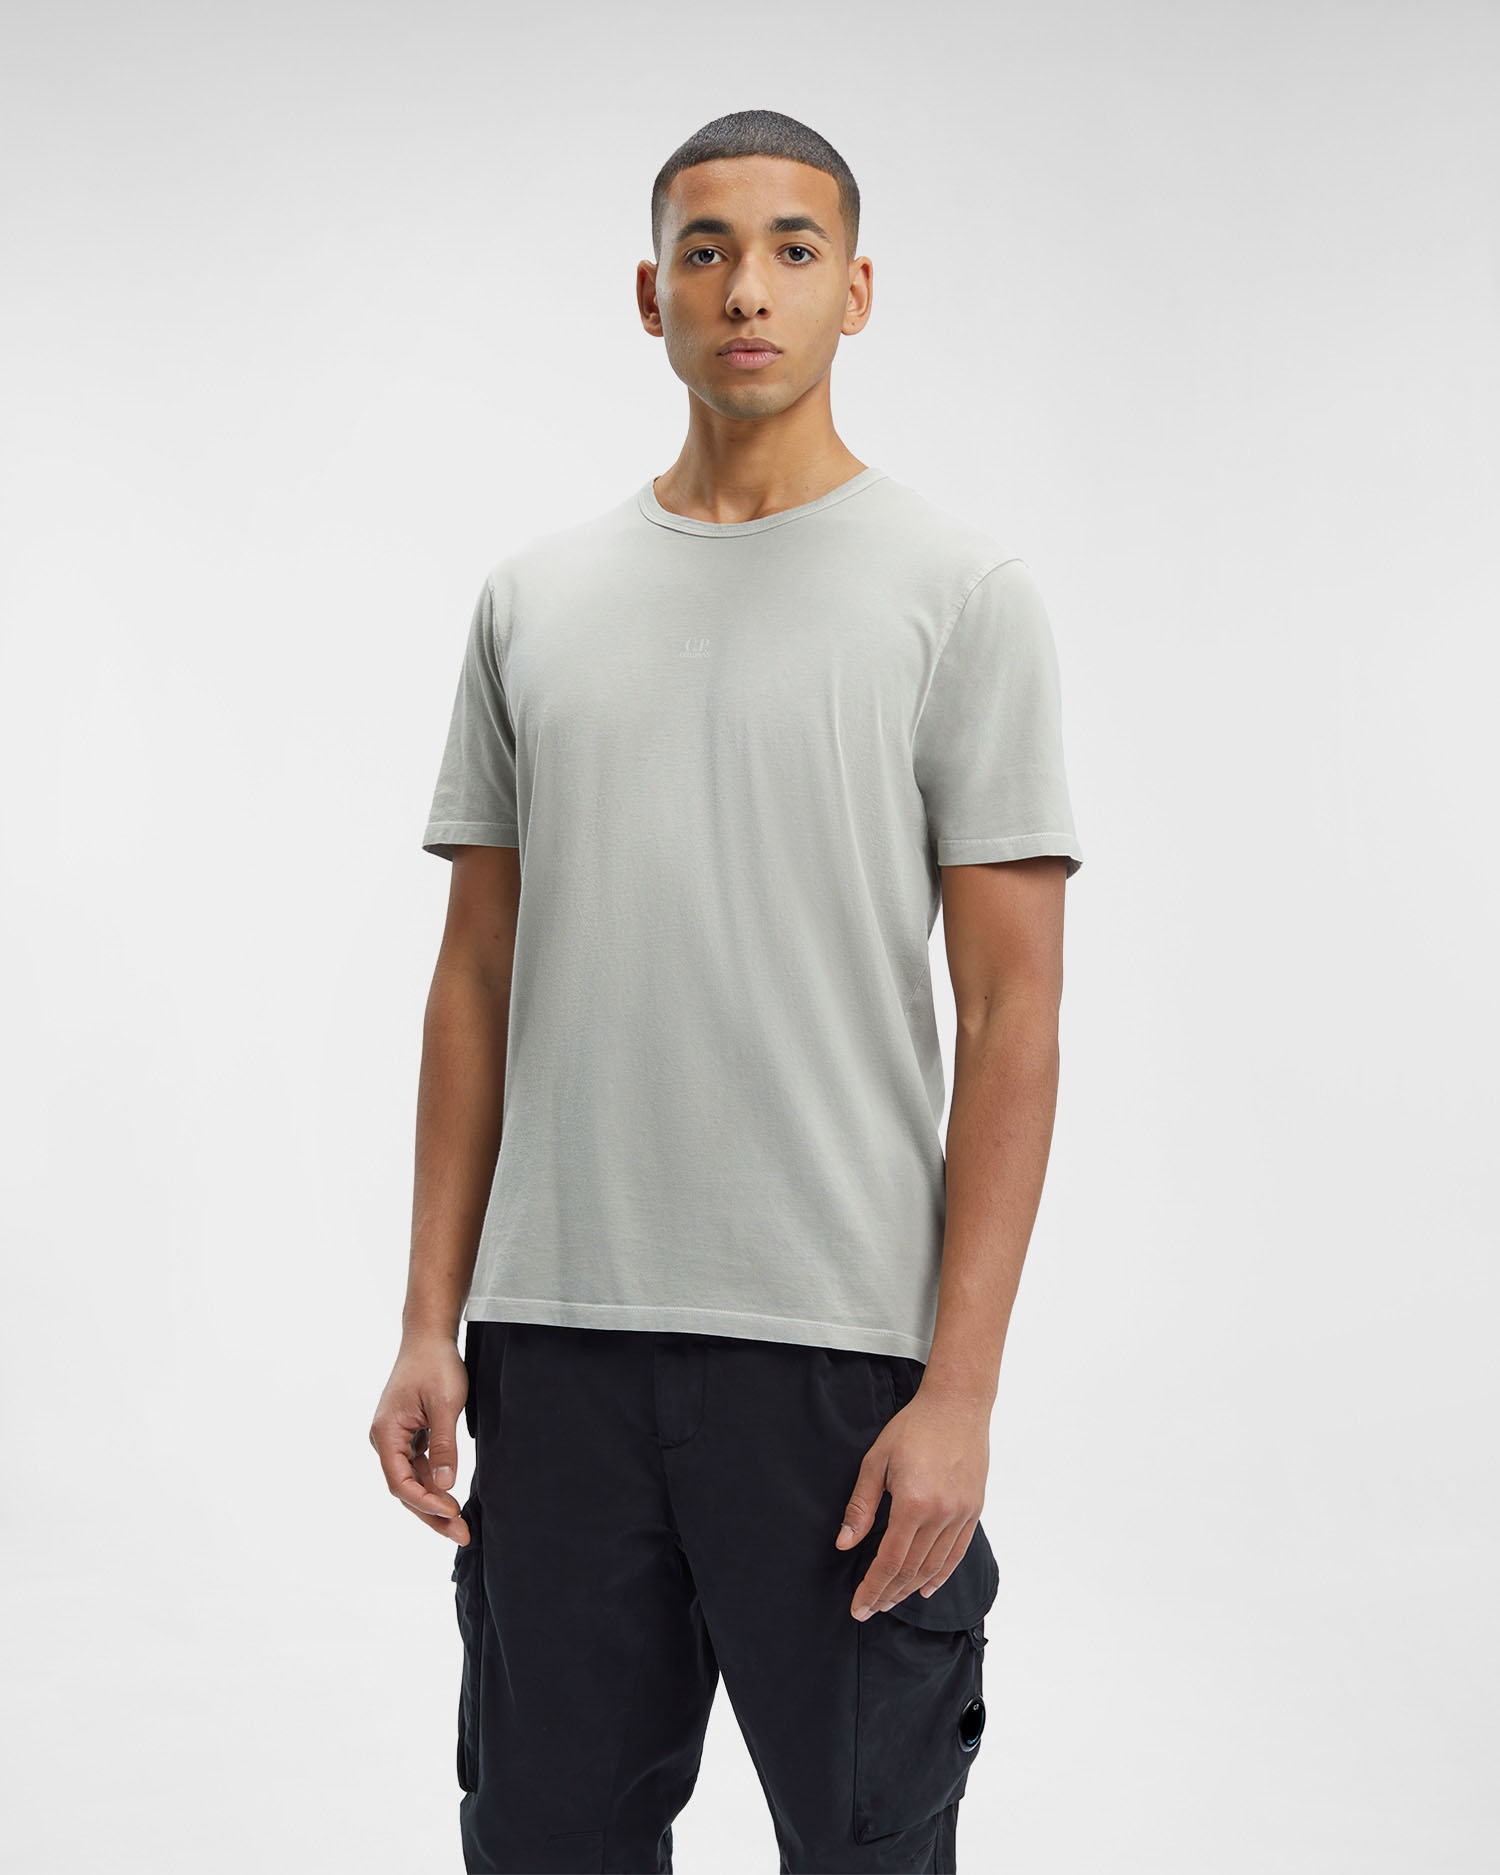 C.P. Online Company 24/1 T-shirt Jersey Resist | Dyed Store Relaxed